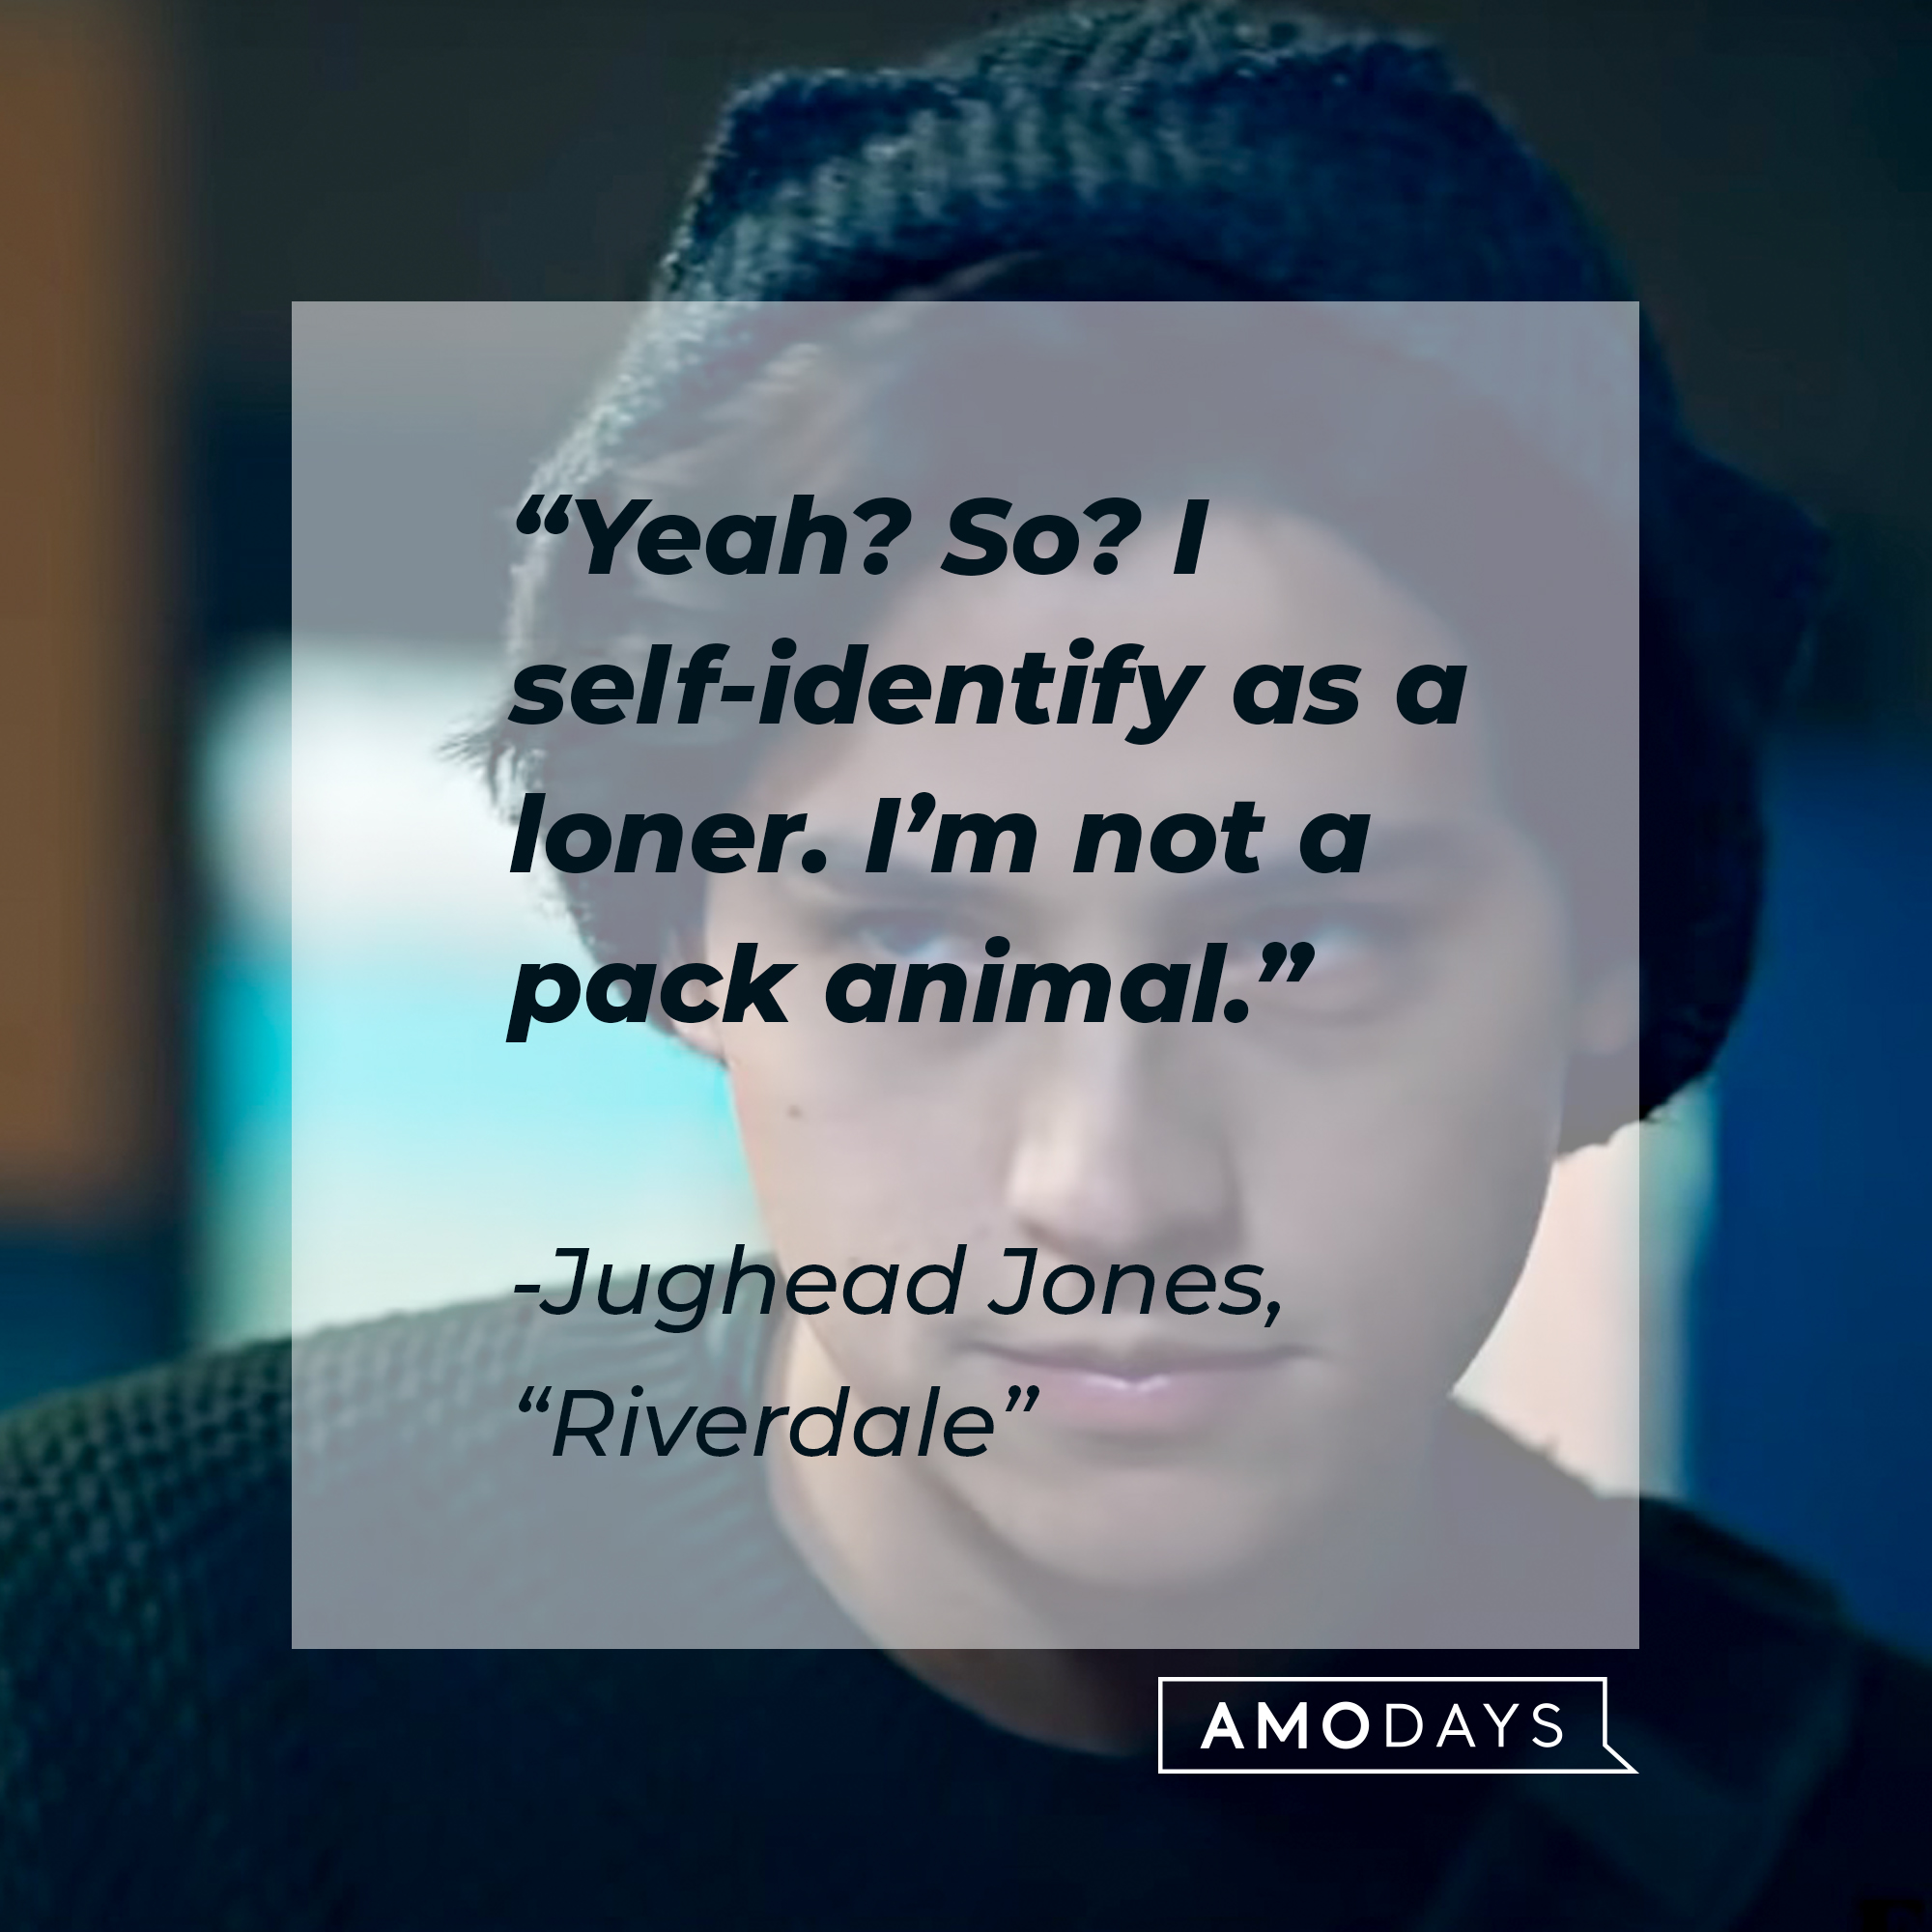 Image of Cole Sprouse as Judhead Jones in "Riverdale" with the quote: “Yeah? So? I self-identify as a loner. I’m not a pack animal.” | Source: facebook.com/Riverdale